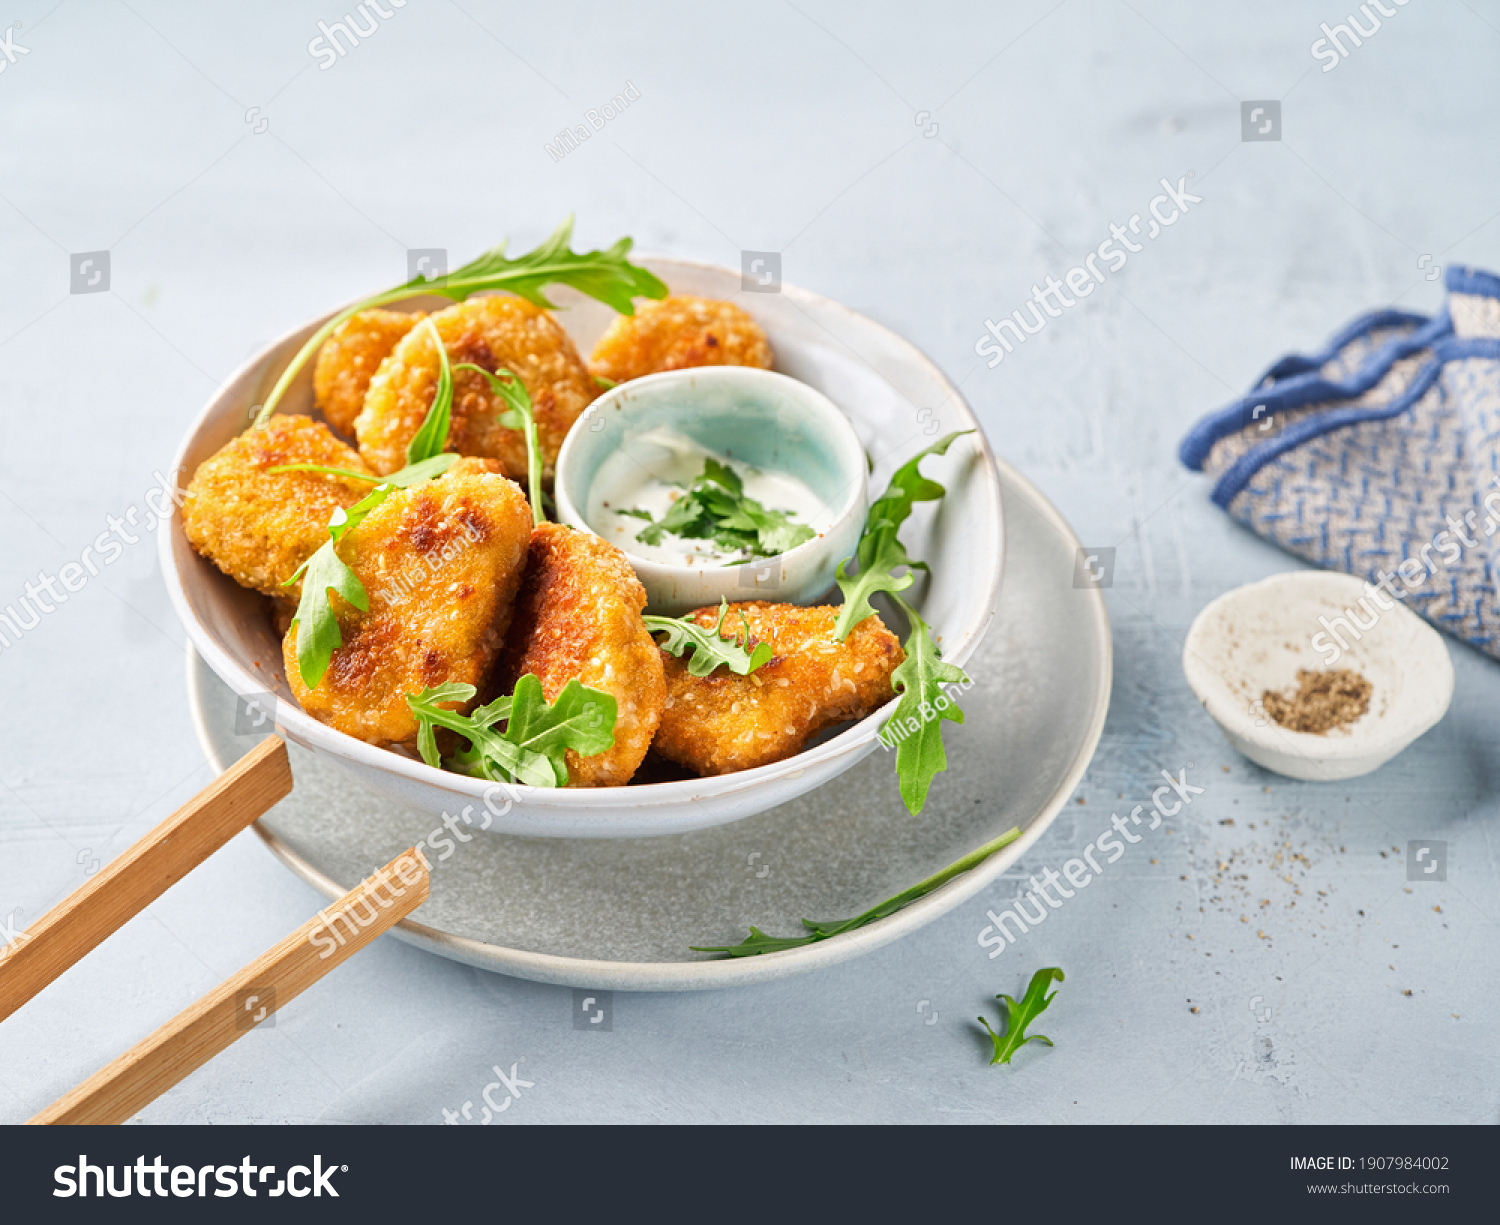 Vegetarian Nuggets with Vegan Dipping Sauce and rocket leaves on a light background with space for text, selective focus. Healthy Diet, Protein Vegetarian Meals concept, alternative meat products. #1907984002